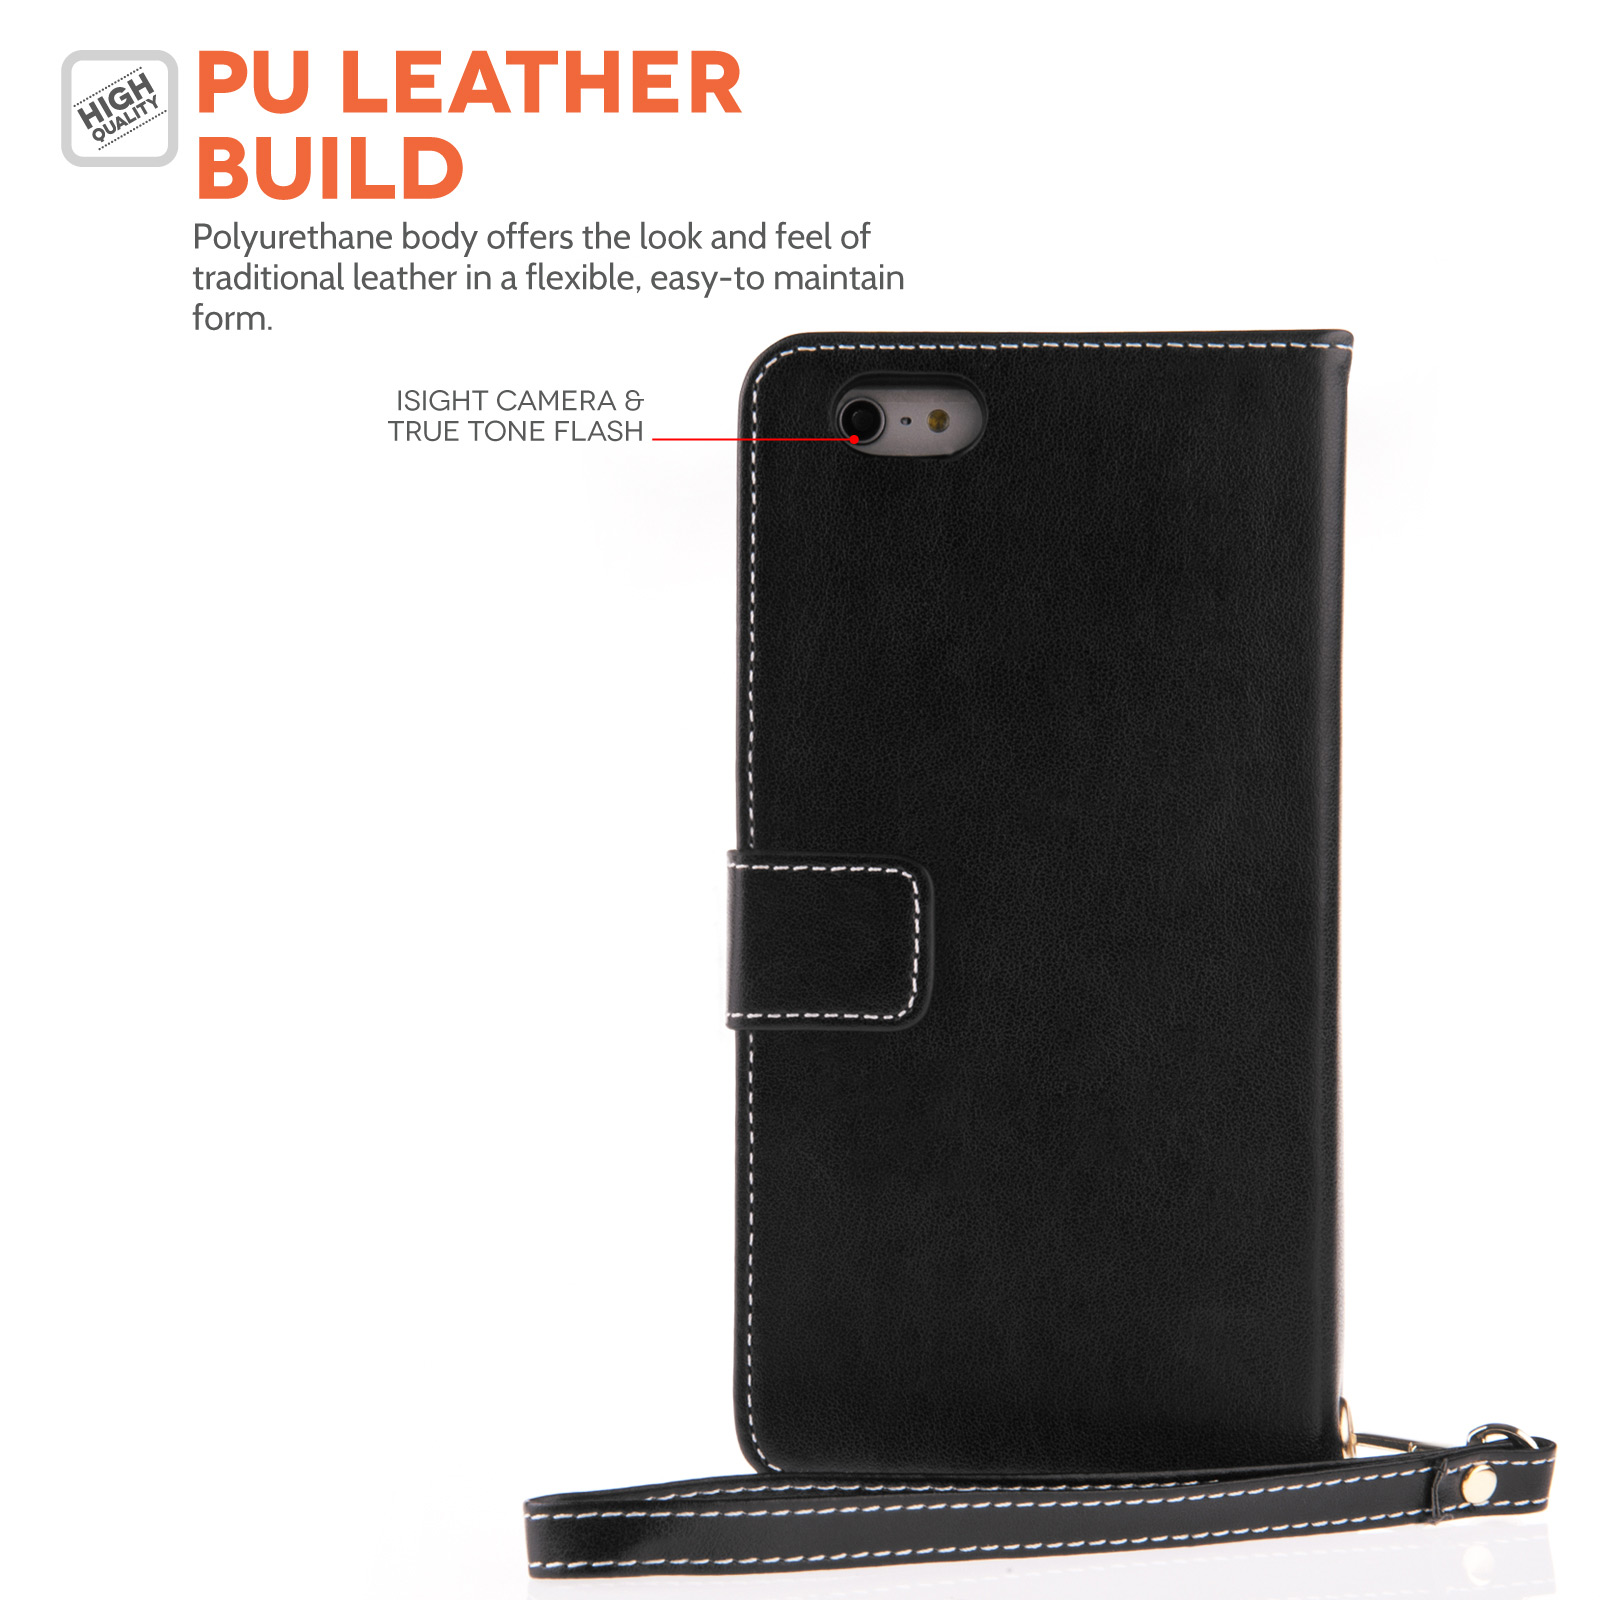 Caseflex iPhone 6 Plus and 6s Plus Leather-Effect Wallet Case – Black with Floral Lining